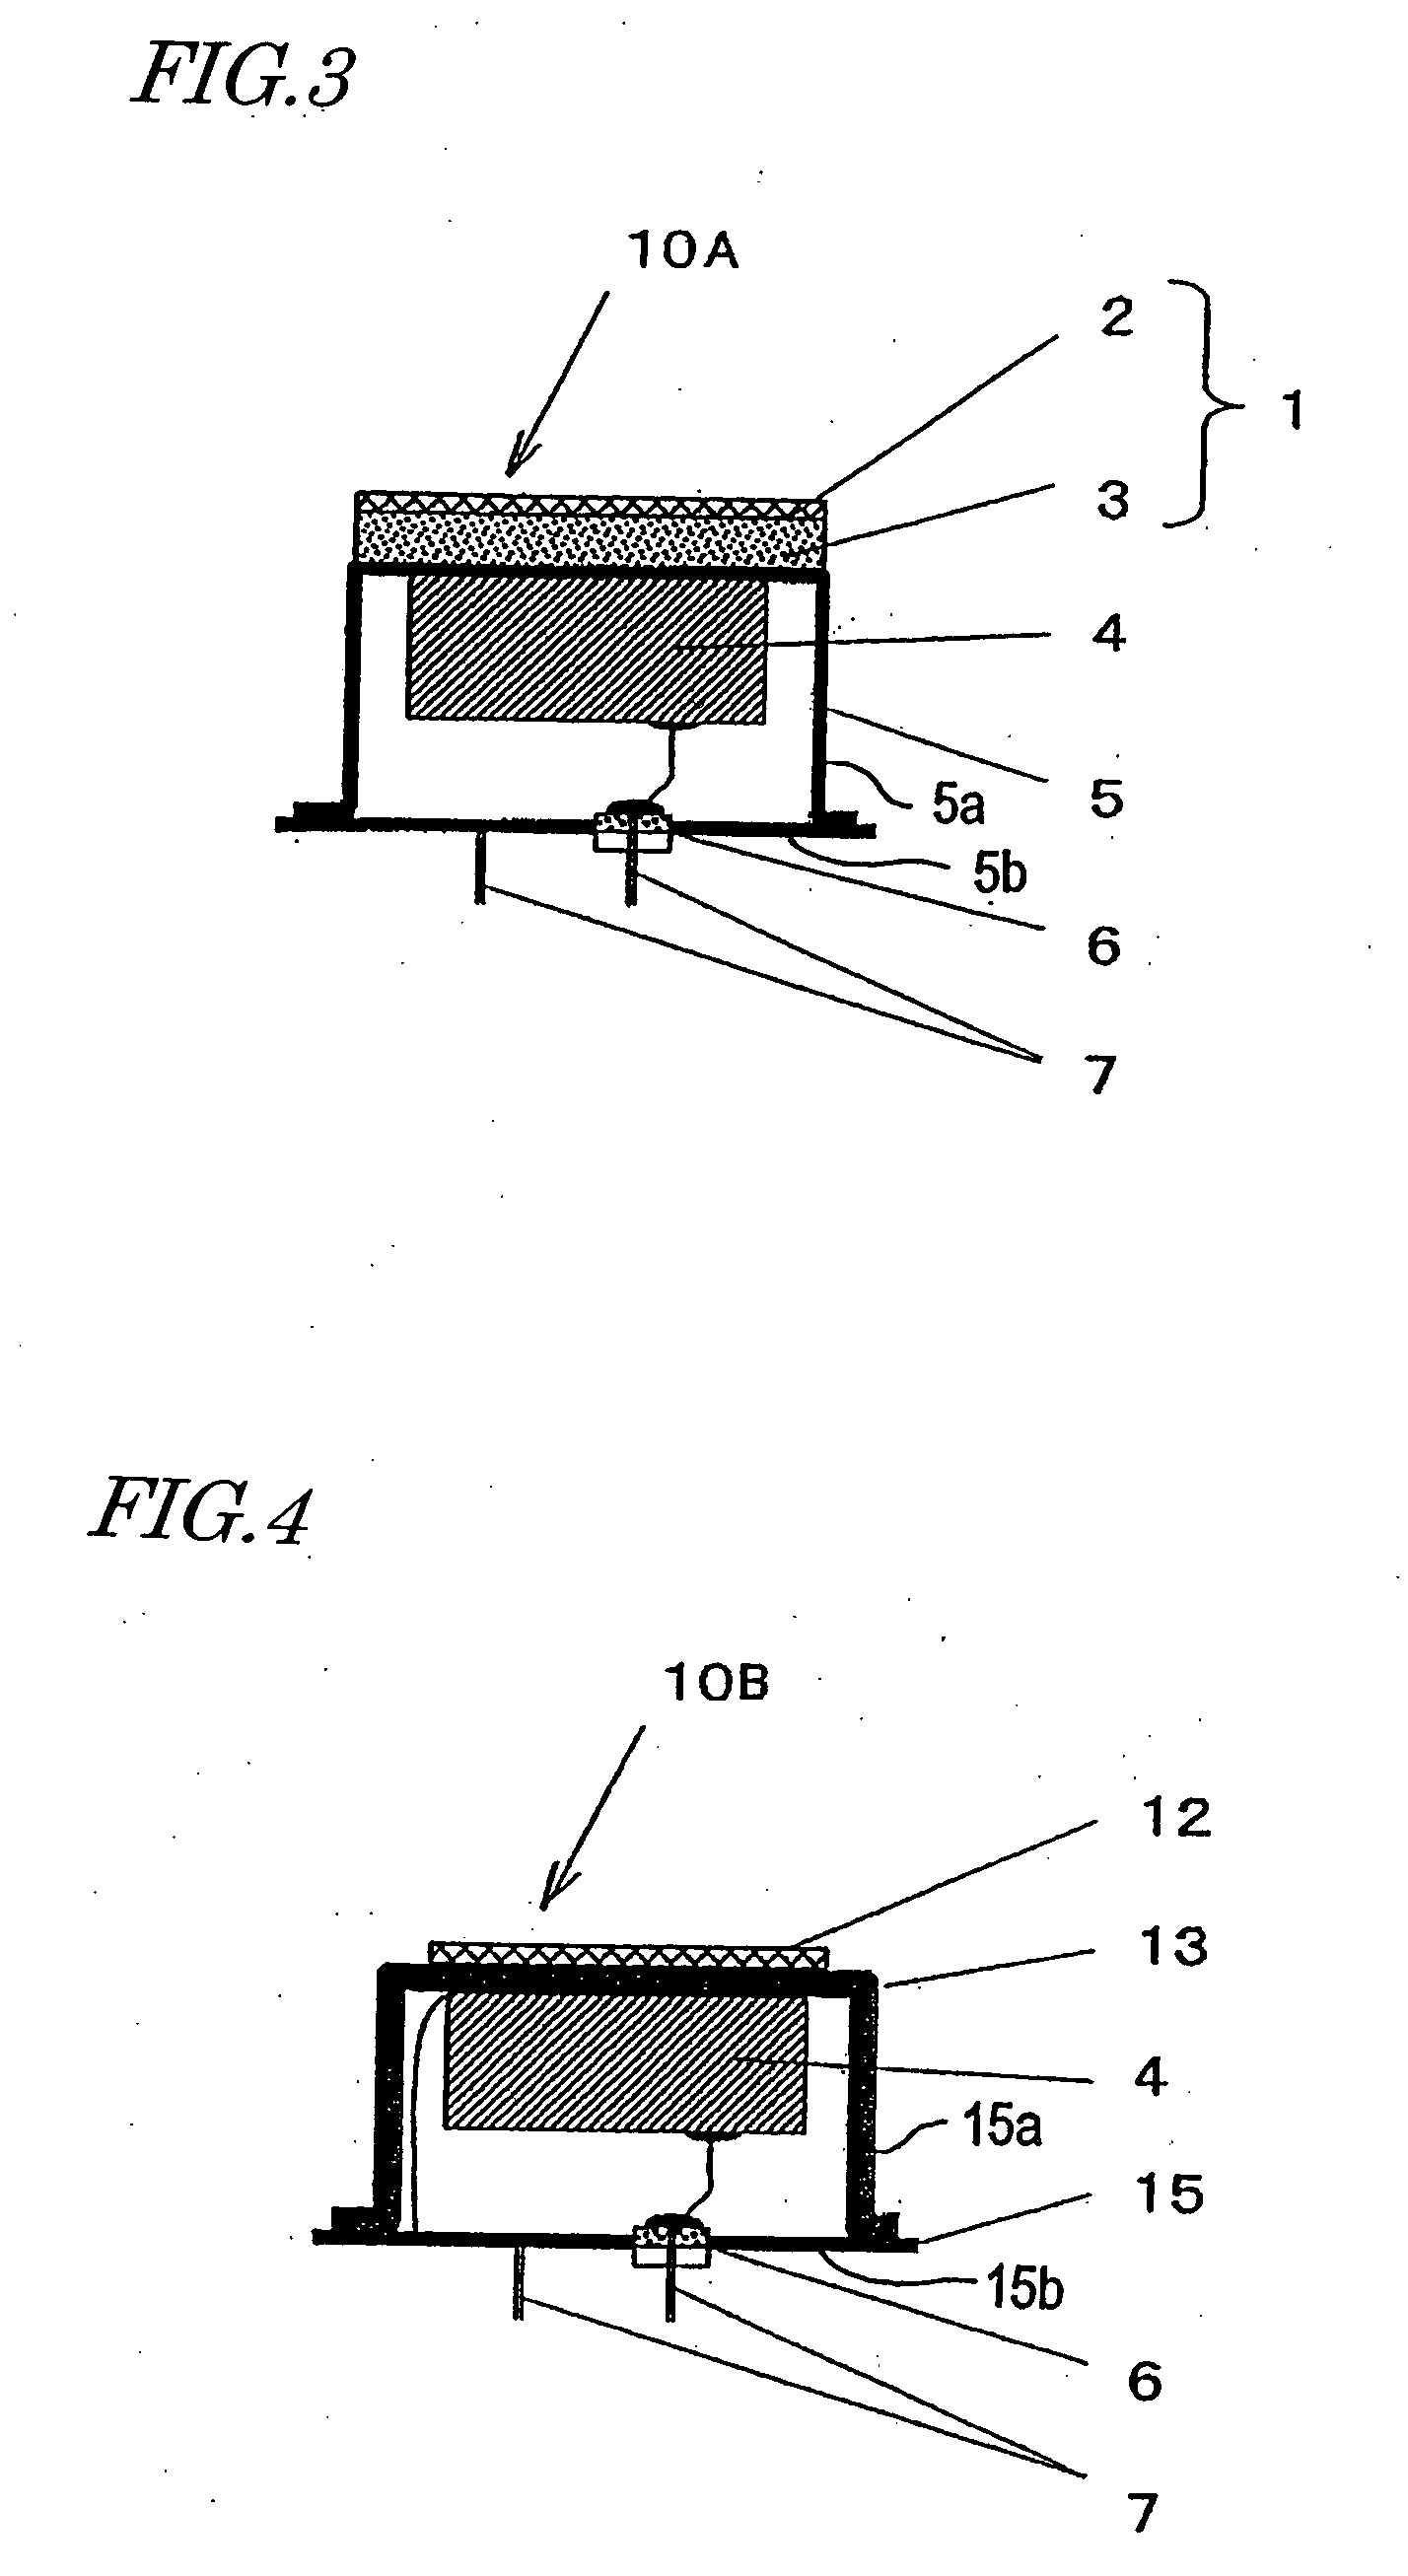 Acoustic matching layer, ultrasonic transmitter/receiver, and ultrasonic flowmeter